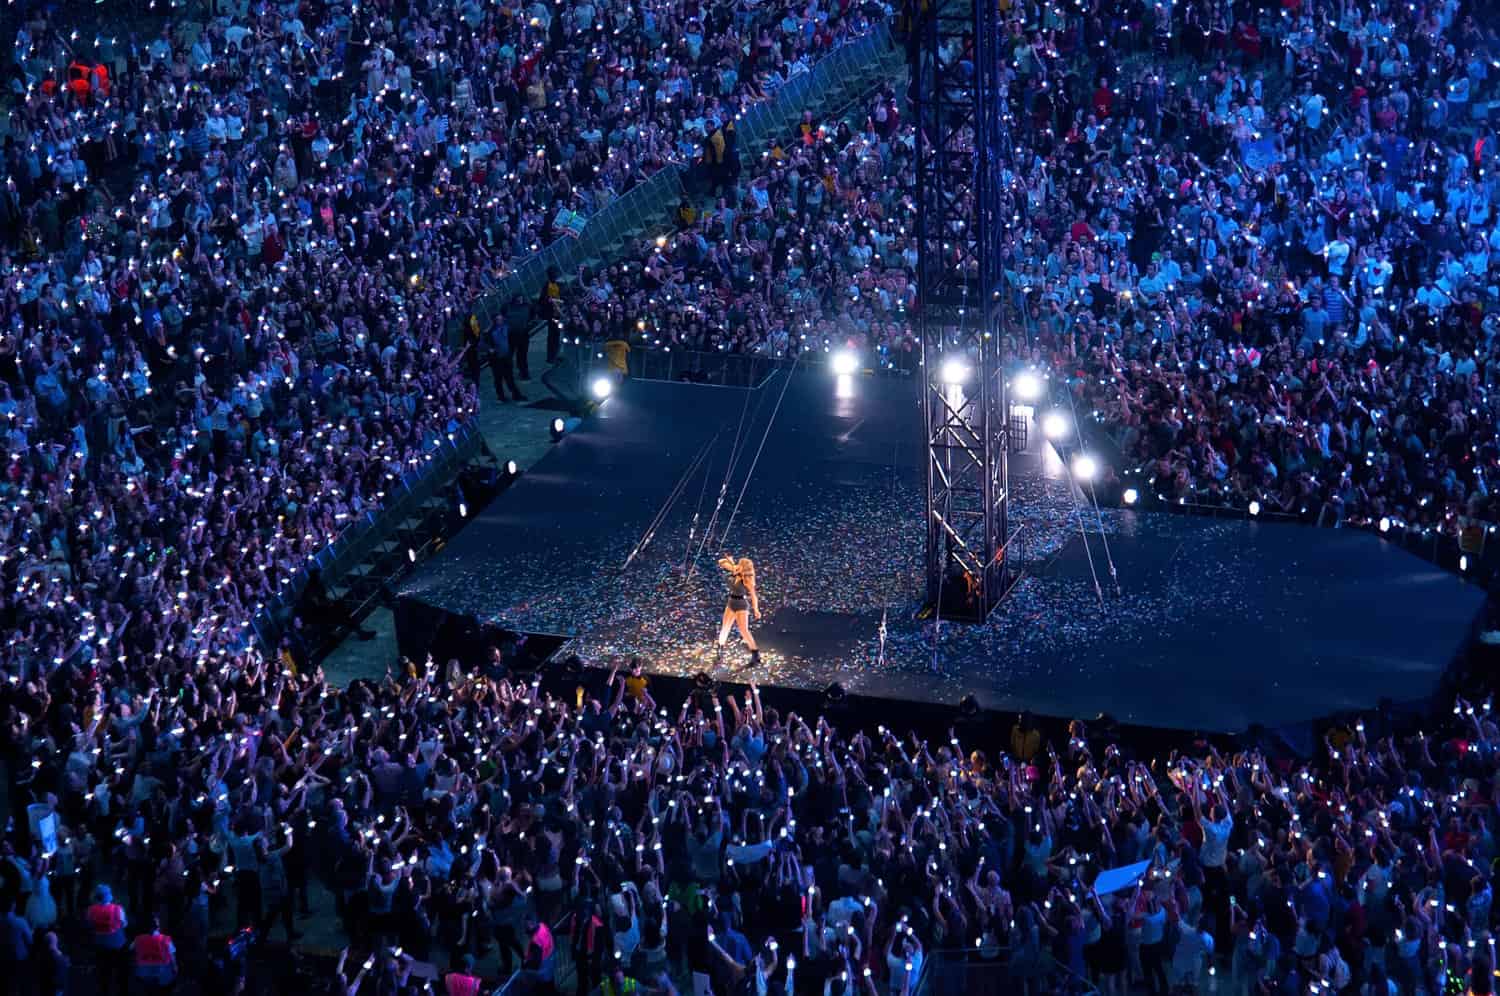 Photography of Taylor Swift in concert at Wembley Stadium on June 23, 2018 | Christian Bertrand